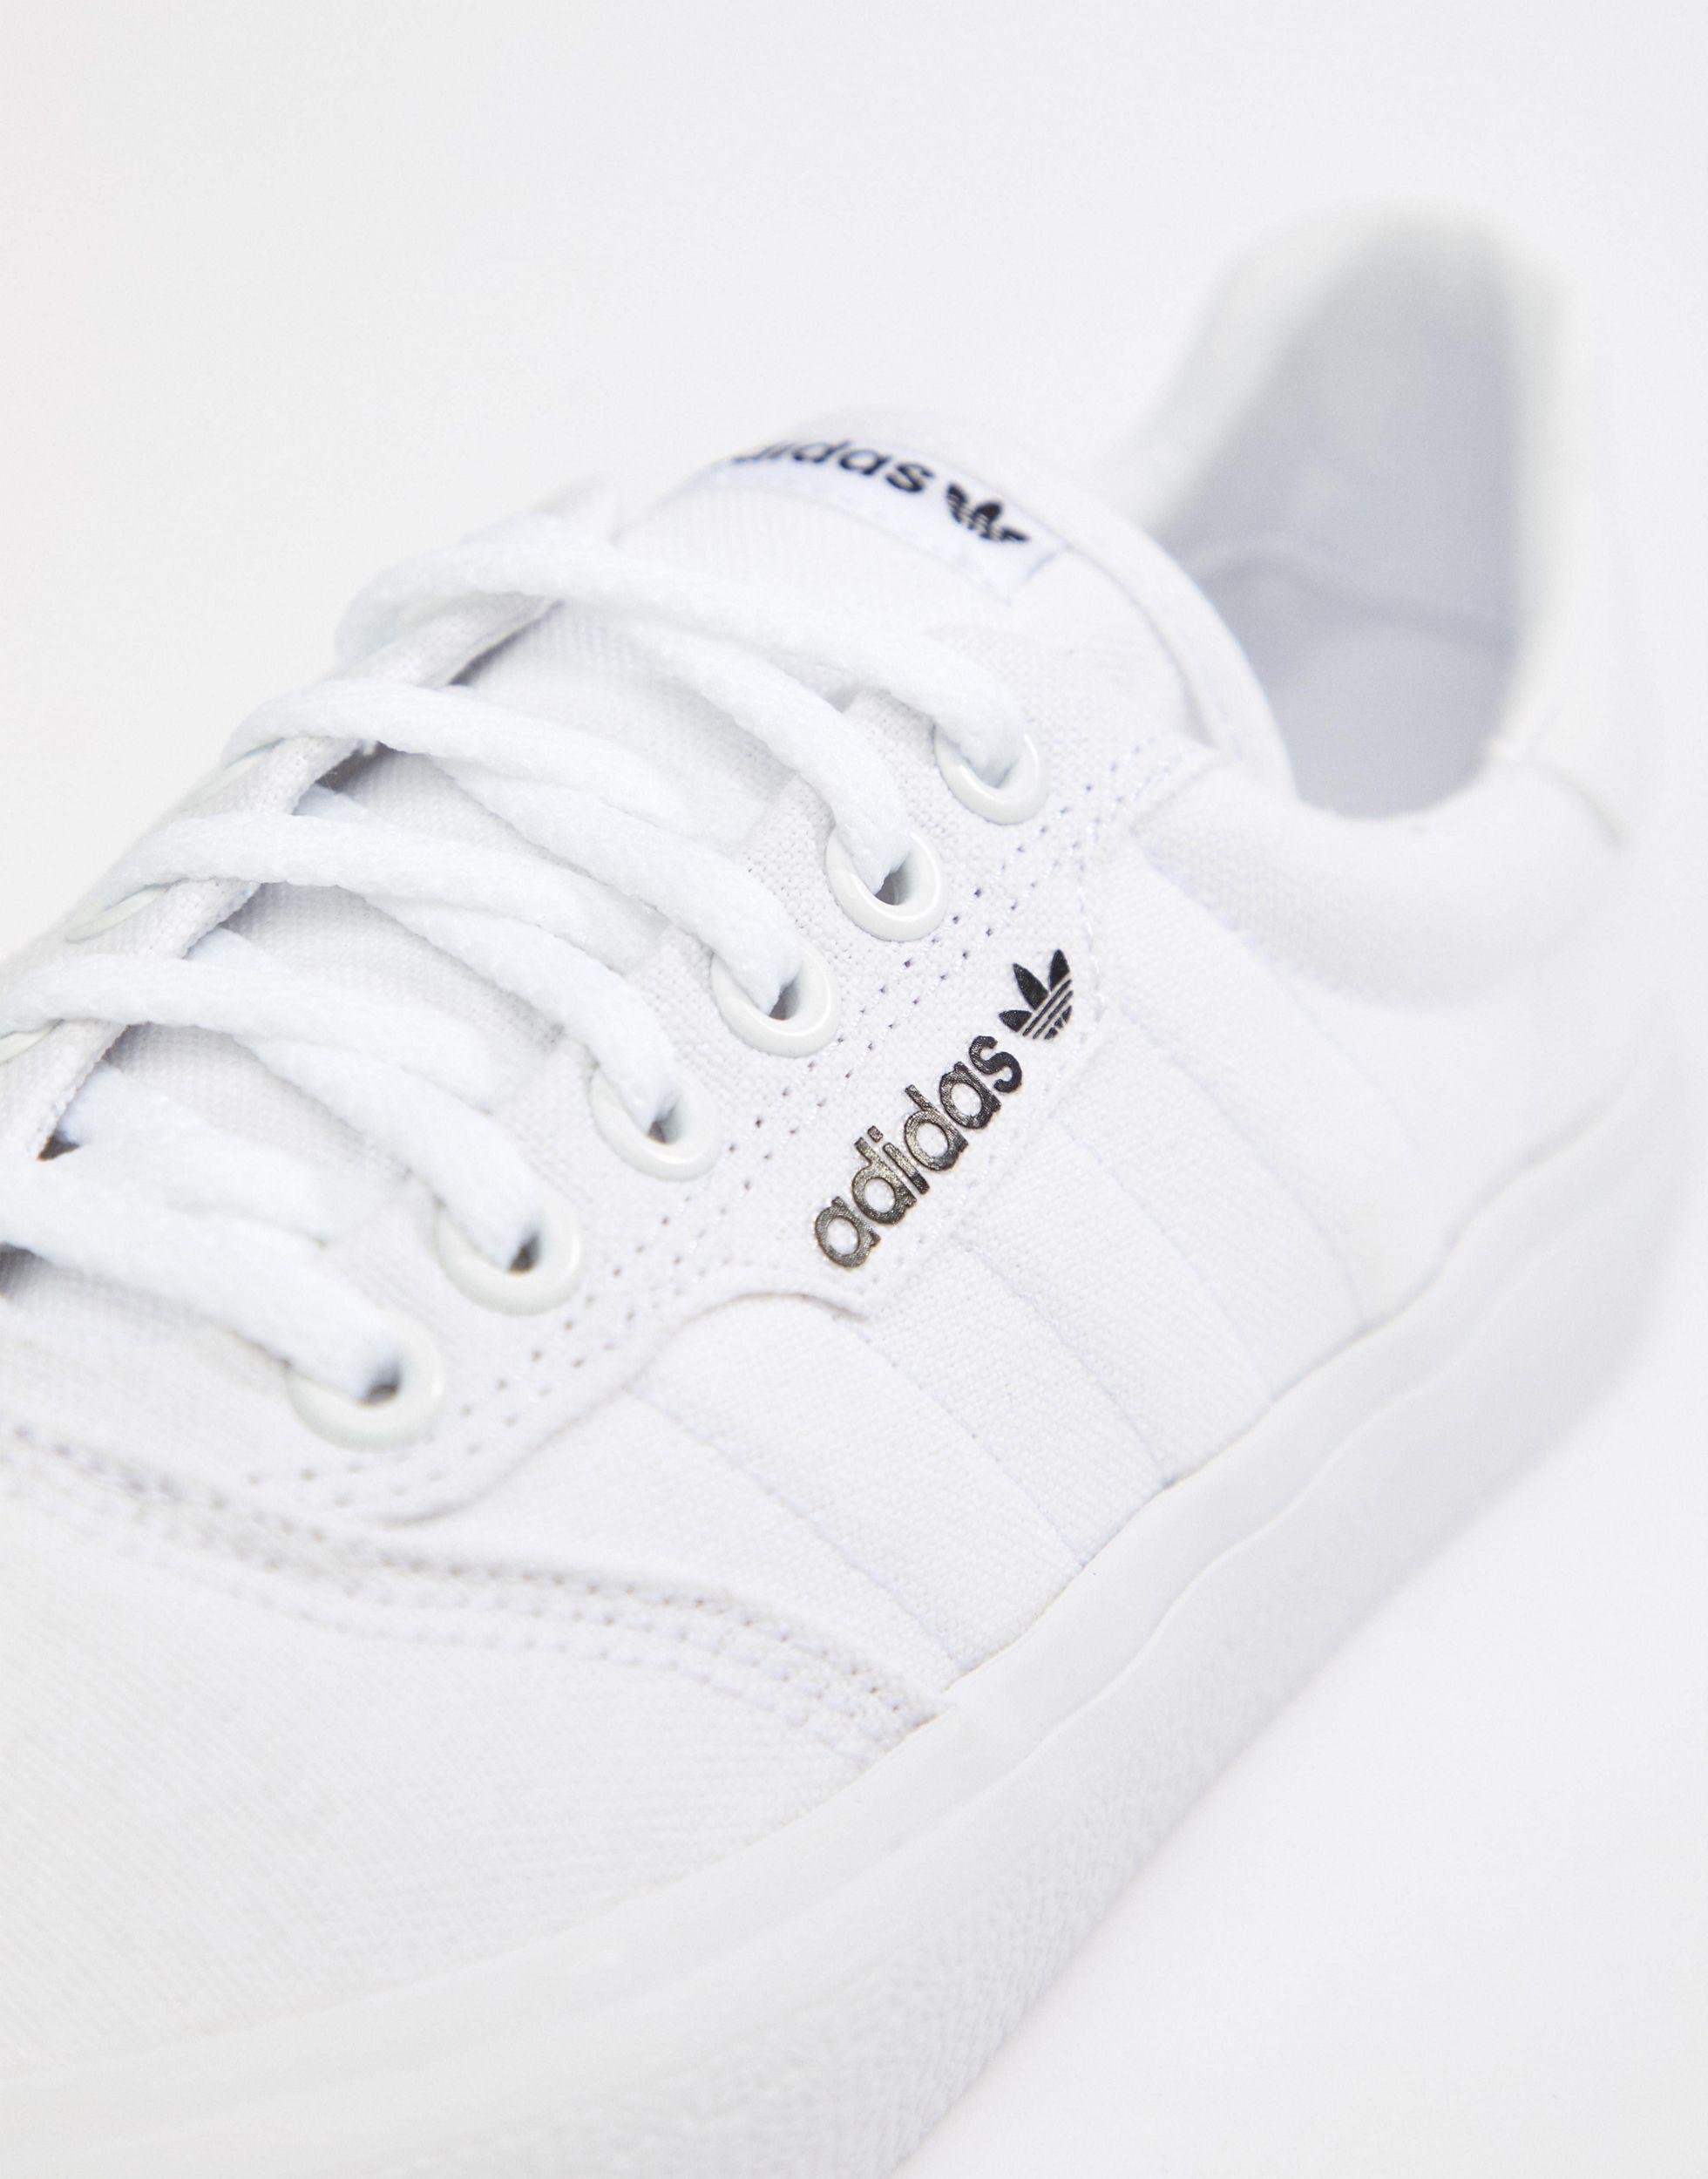 adidas Originals Rubber 3mc Trainers in Gold/White/White (White) for Men -  Save 71% - Lyst